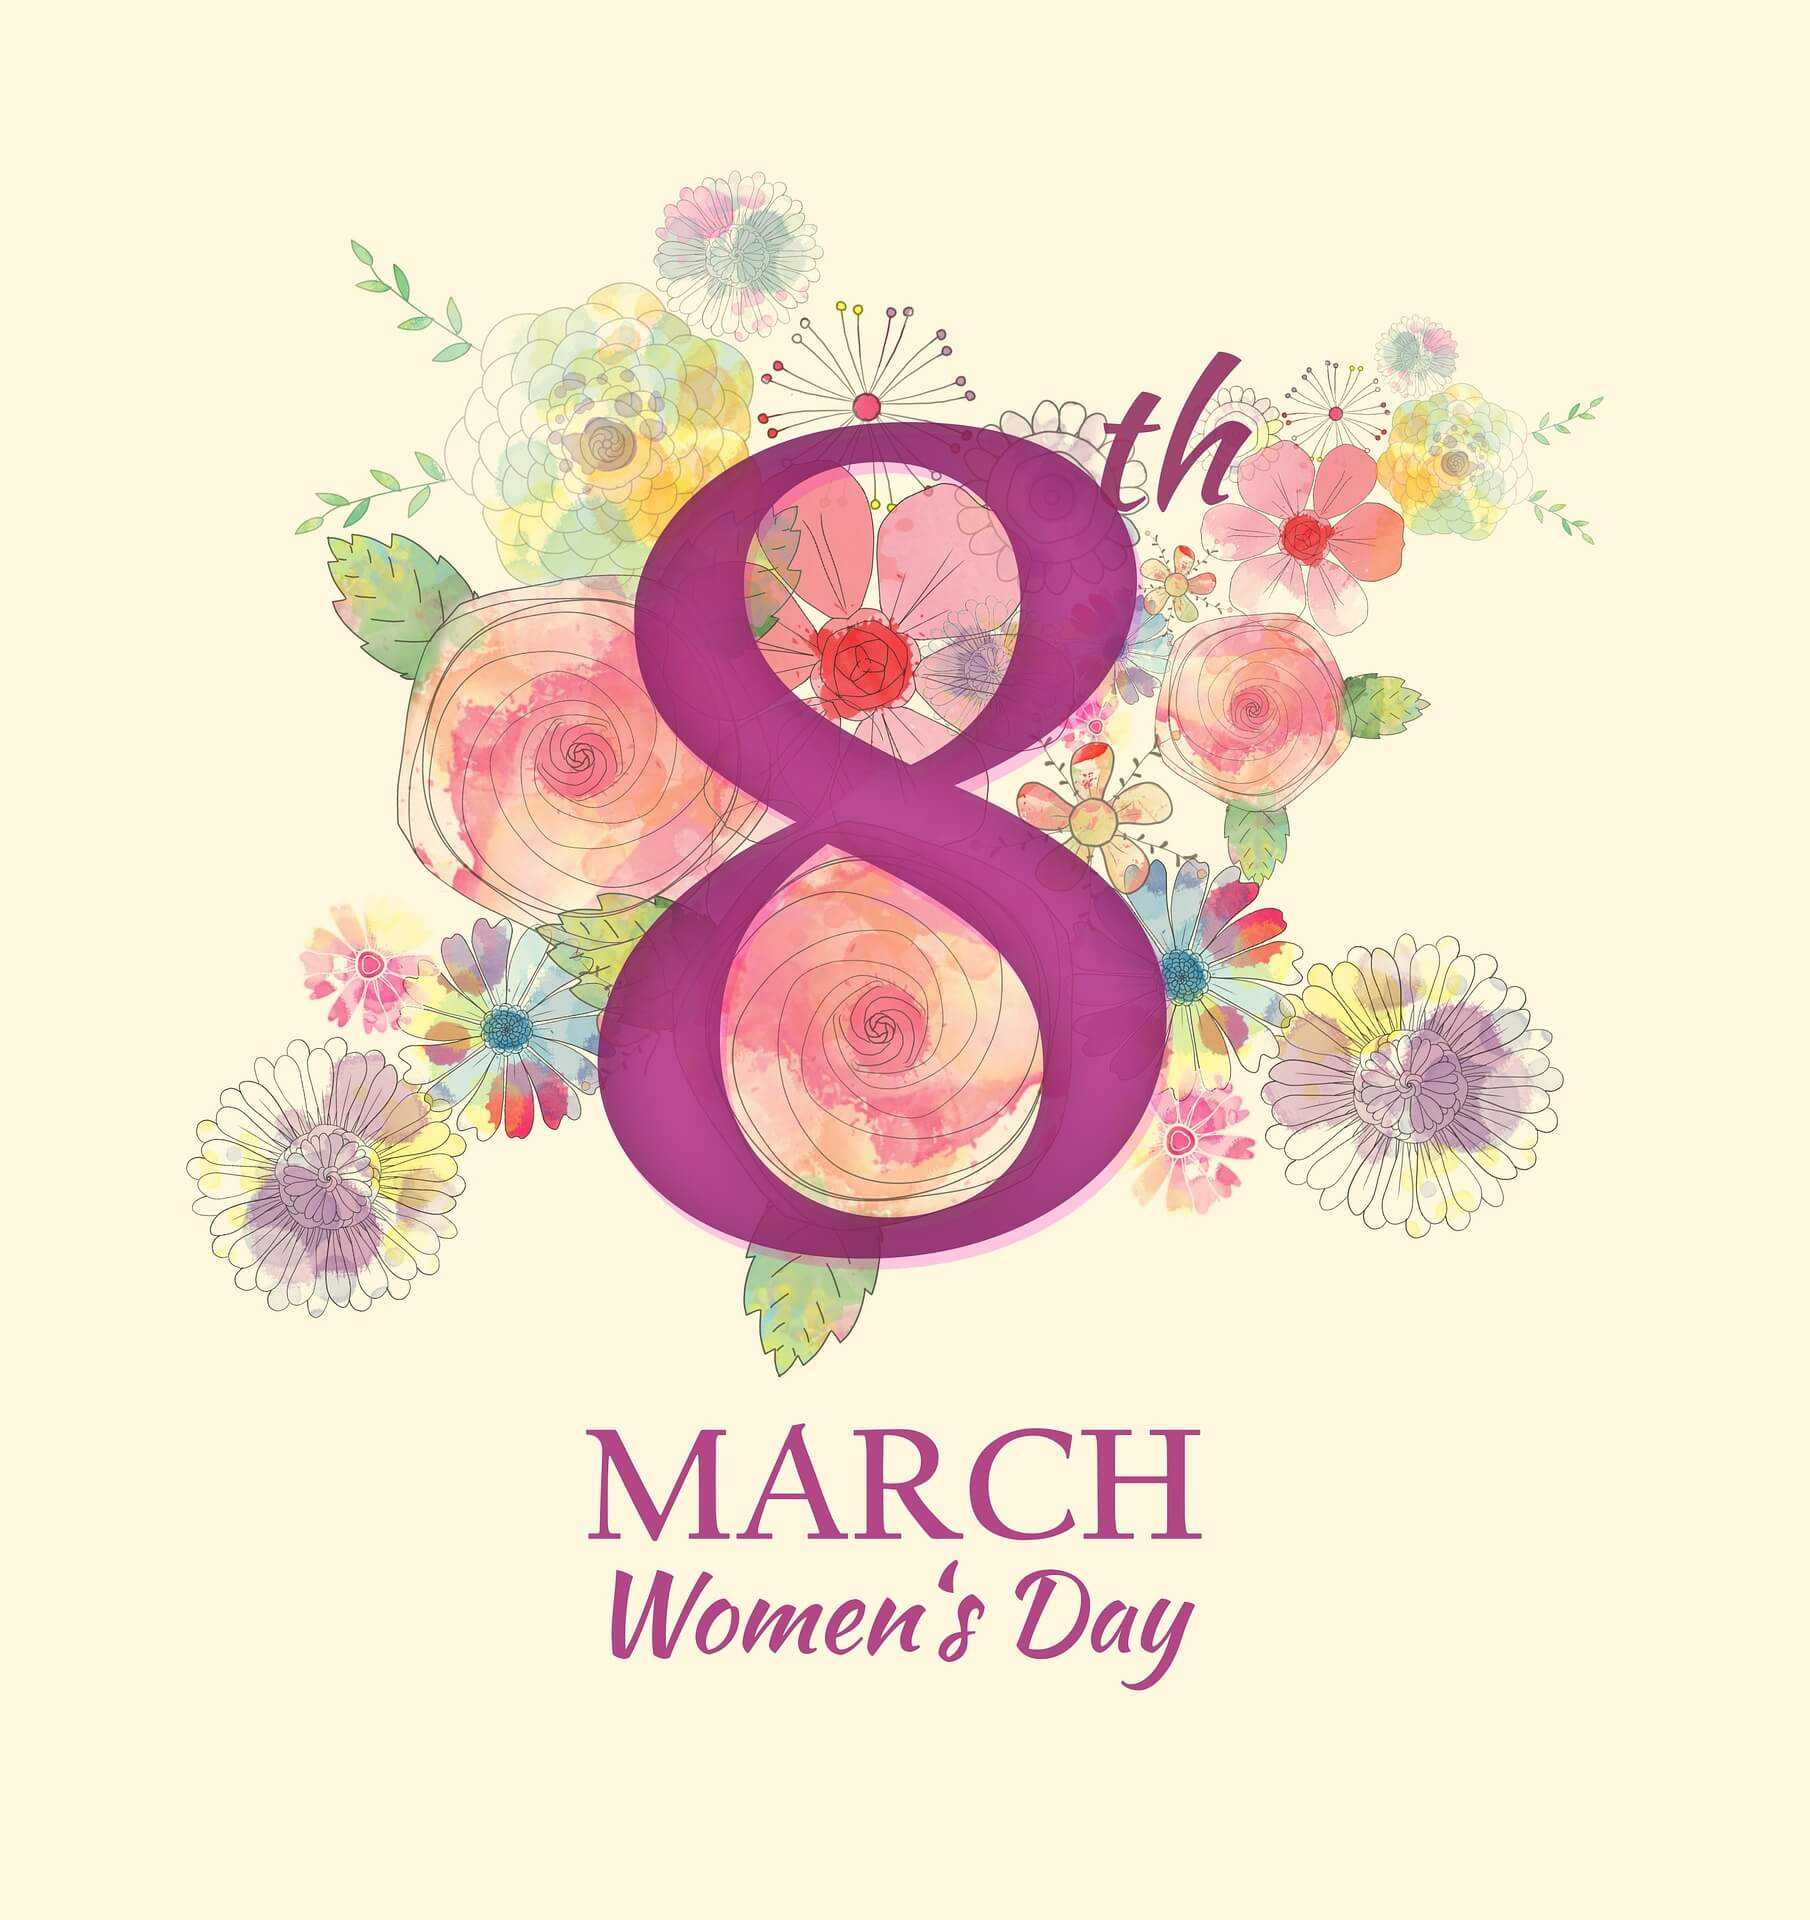 women's day gifts march 8th